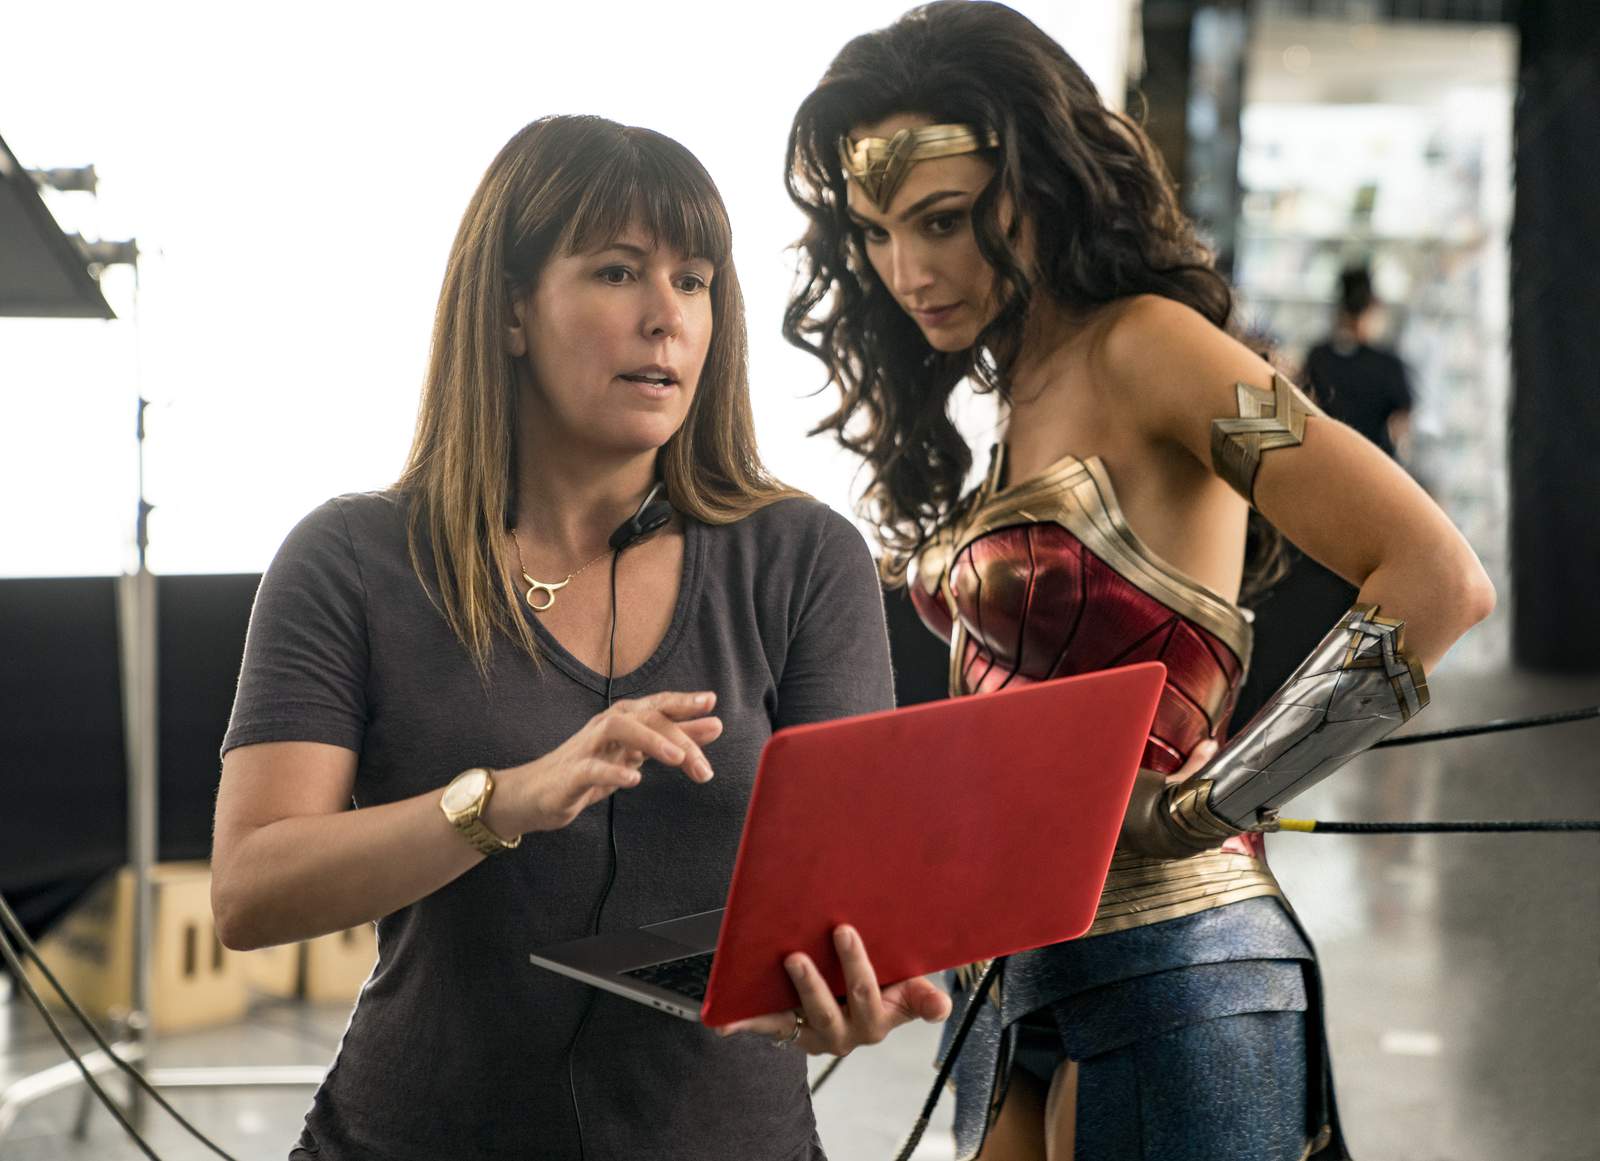 From ‘Wonder Woman’ to ‘Star Wars,’ Jenkins’ rise continues